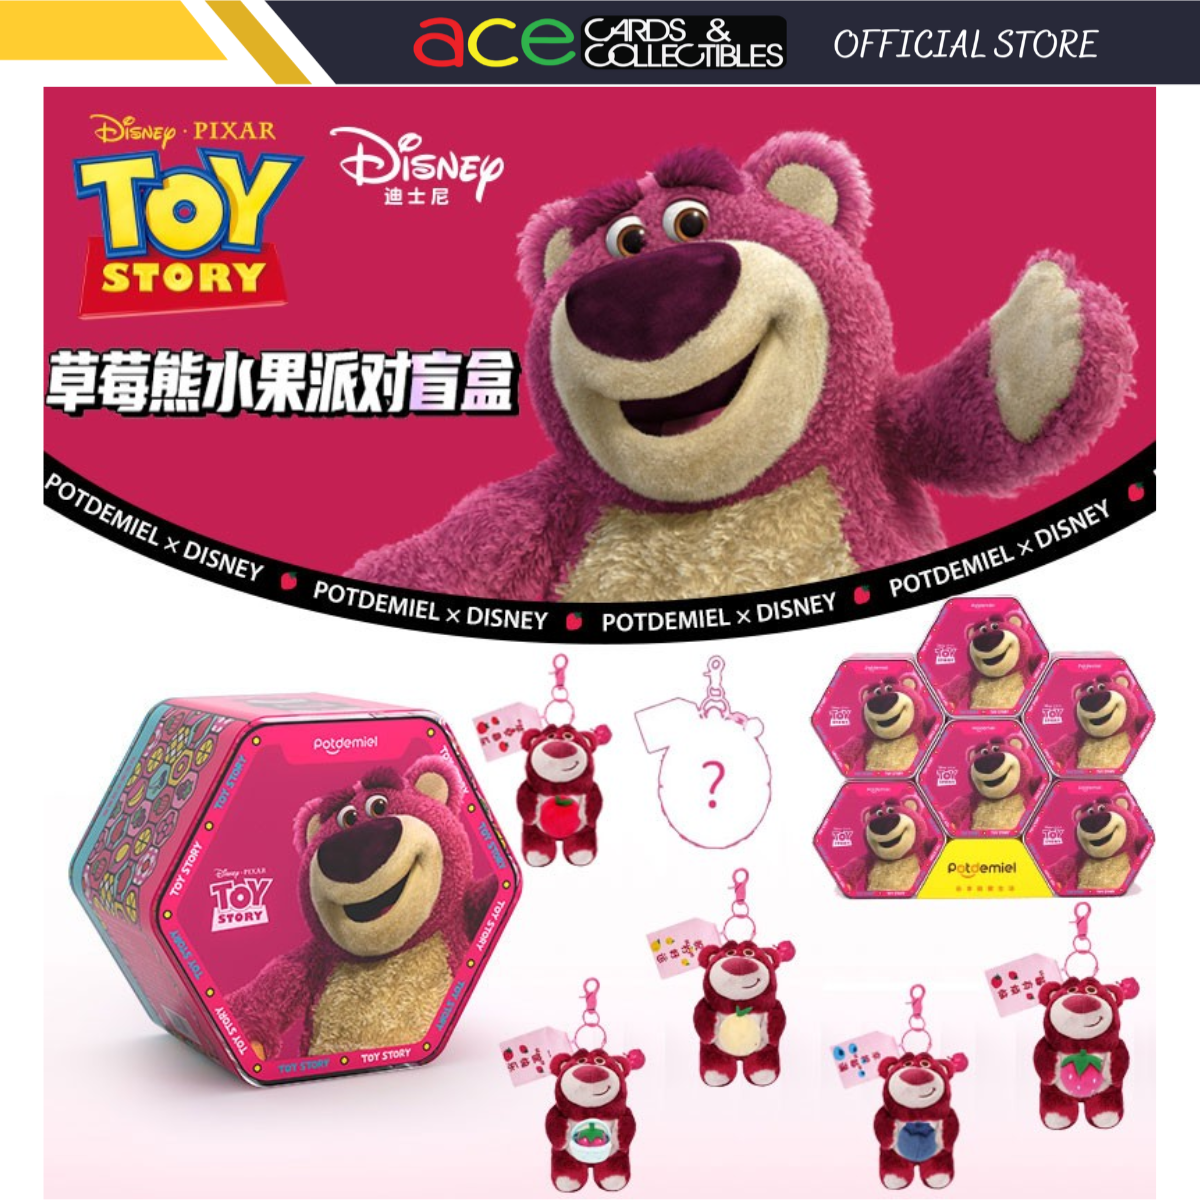 52TOYS Blind Box LULU The Piggy Travel Series, Mystery Box, 1PC Action  Figure Collectible Toy Desktop Decoration Gift